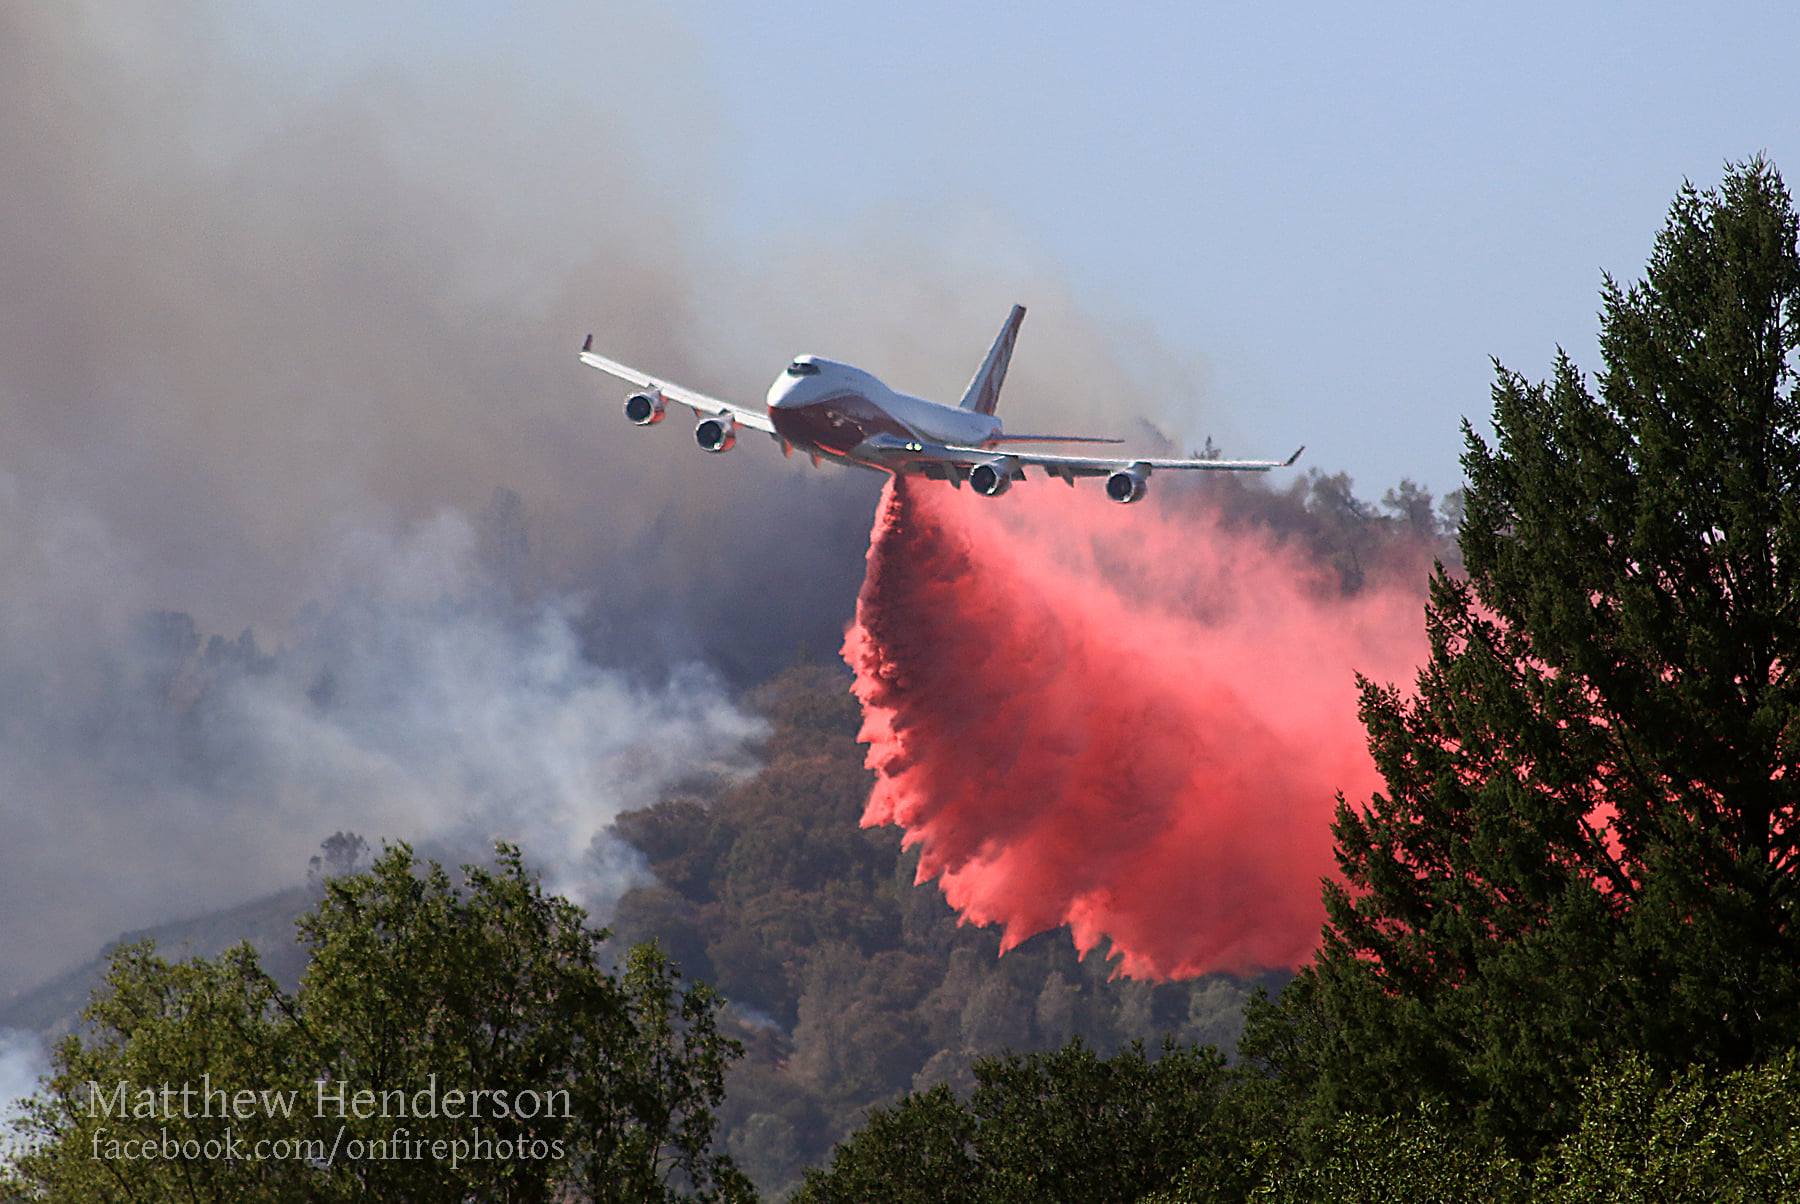 FSEEE Comments on Grounding of World’s Largest Firefighting Plane